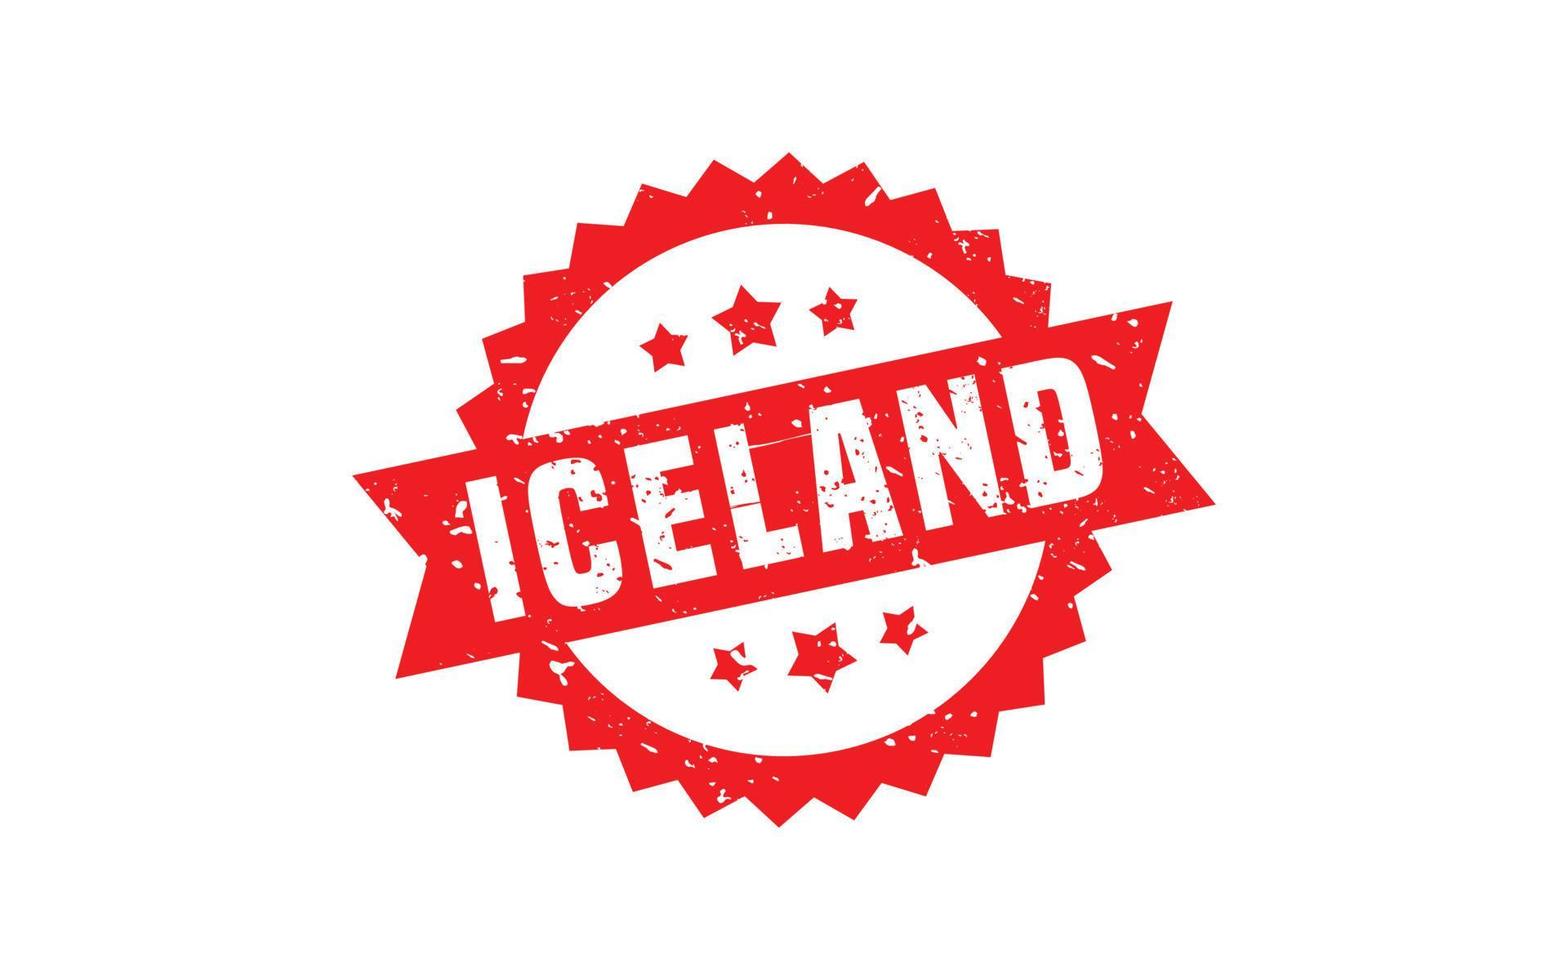 ICELAND stamp rubber with grunge style on white background vector